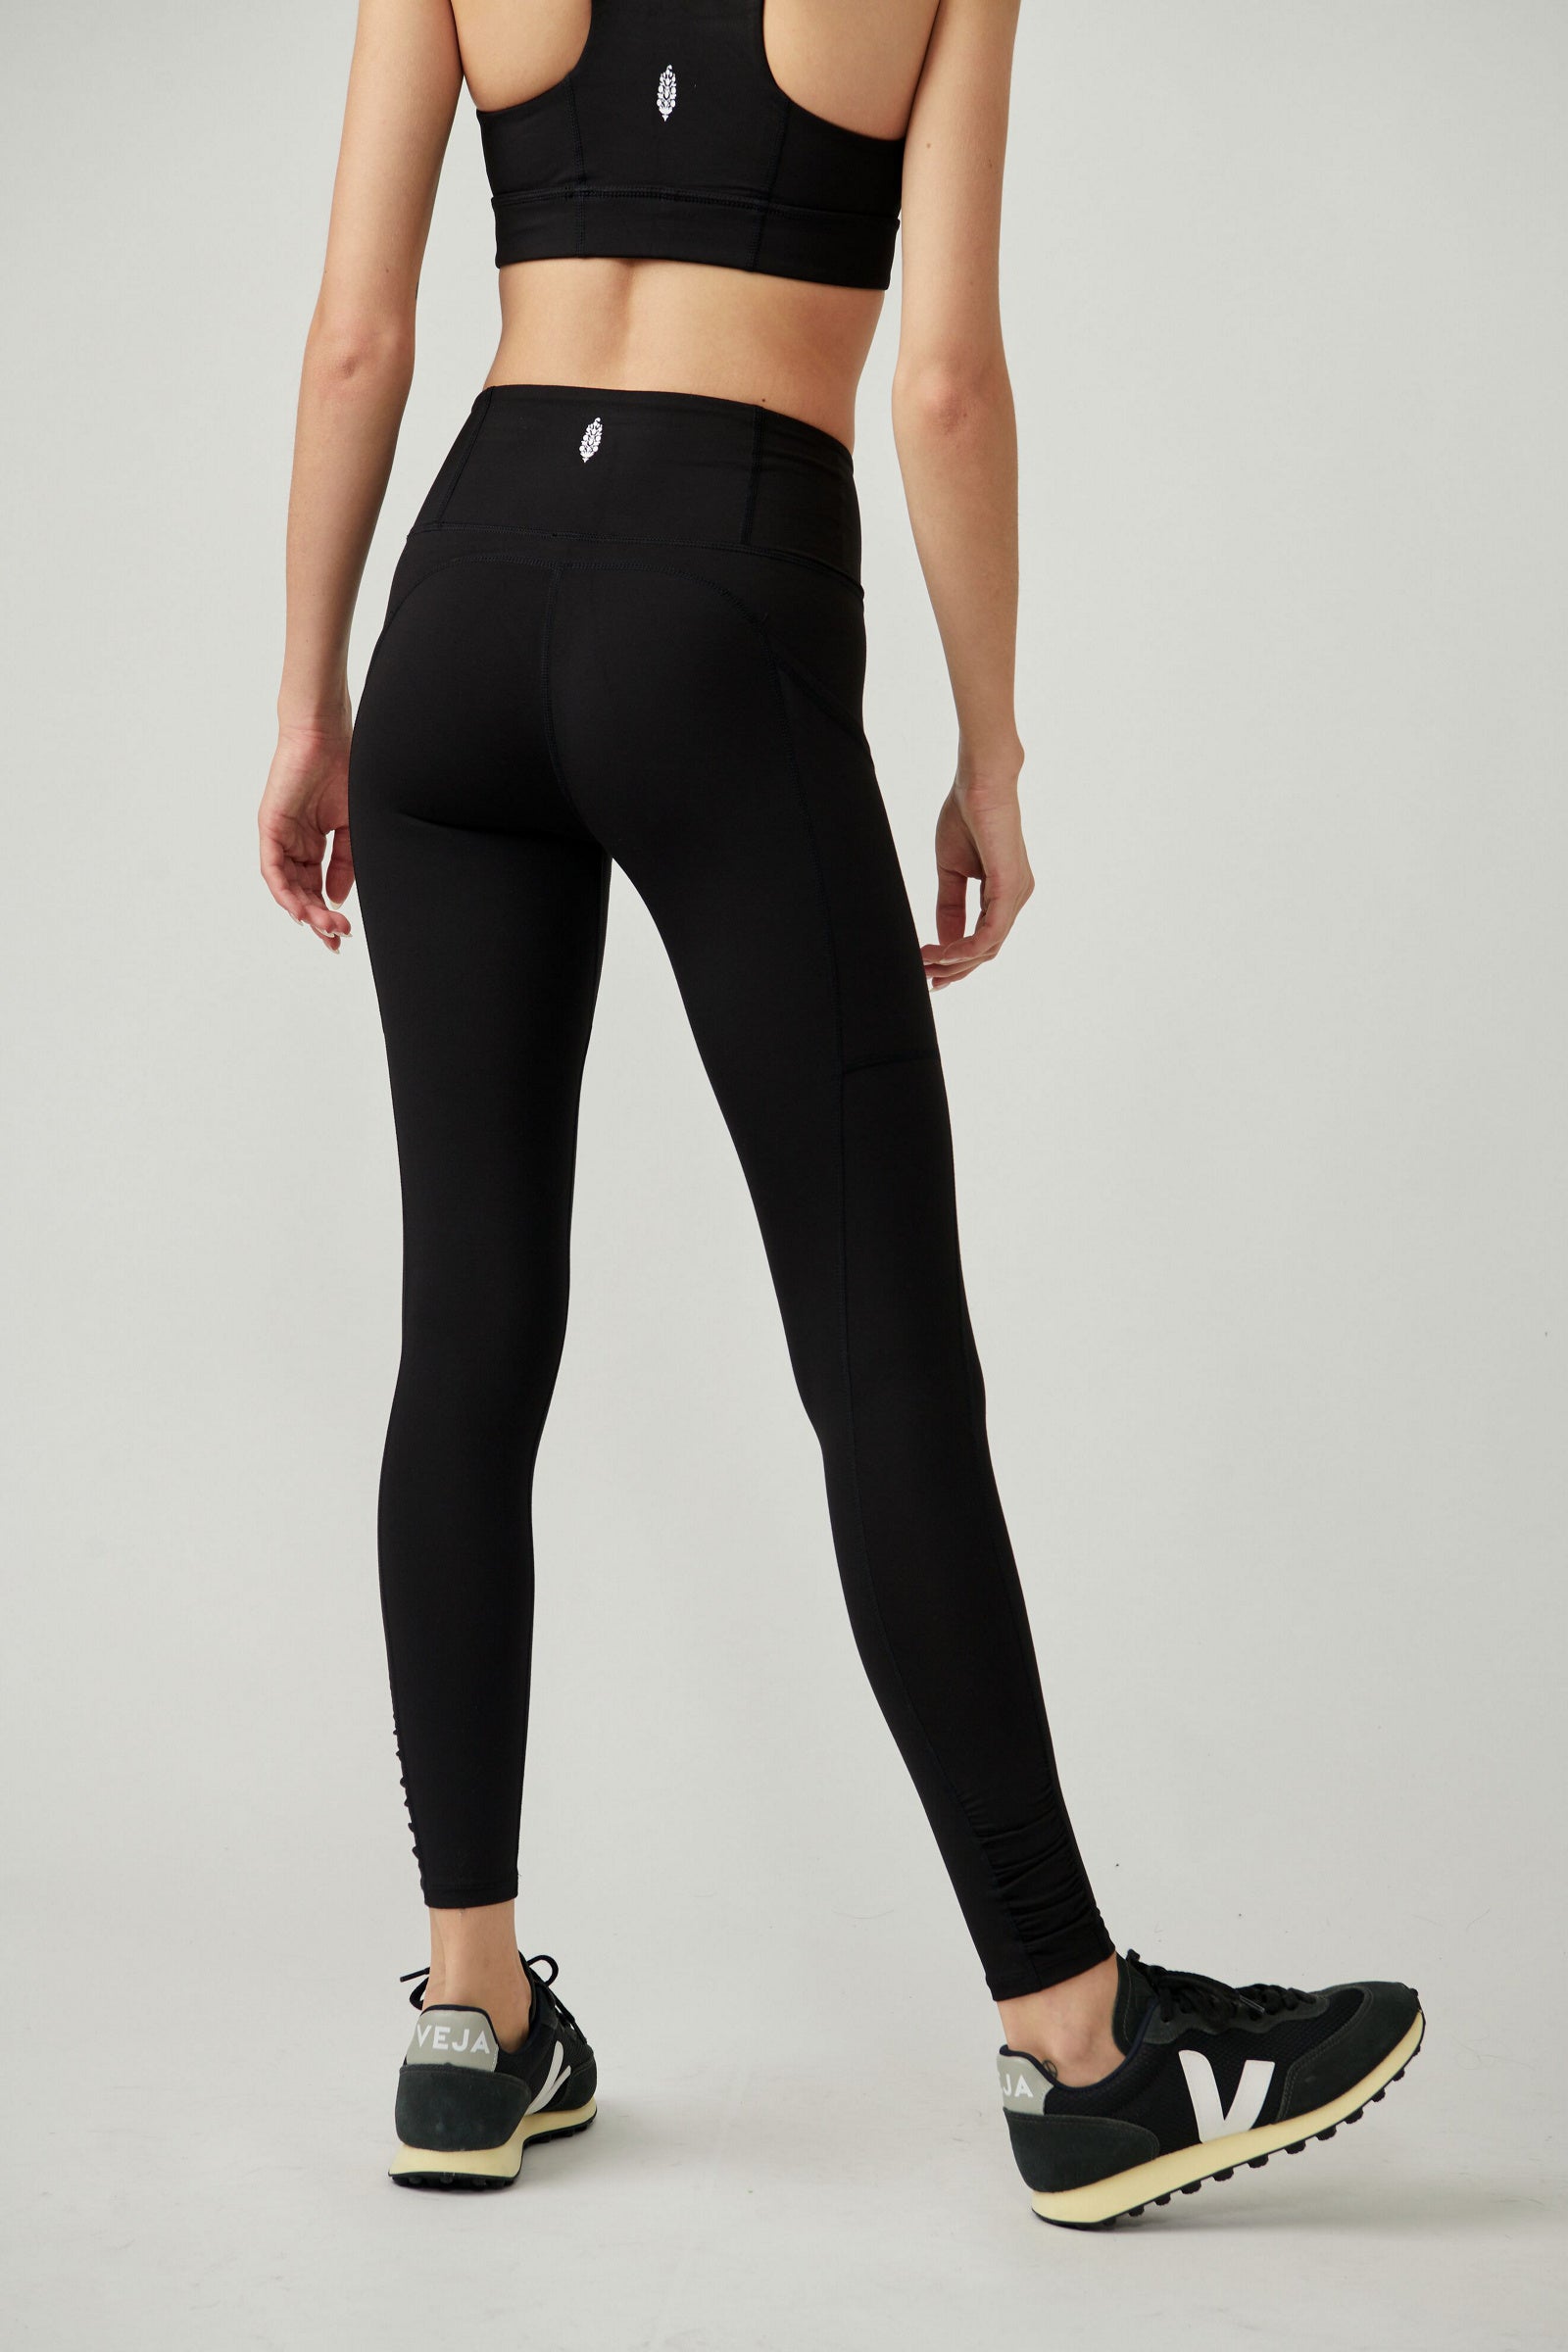 FREE PEOPLE MOVEMENT WRAP LOSE CONTROL LEGGING - BLACK 5439 – Work It Out